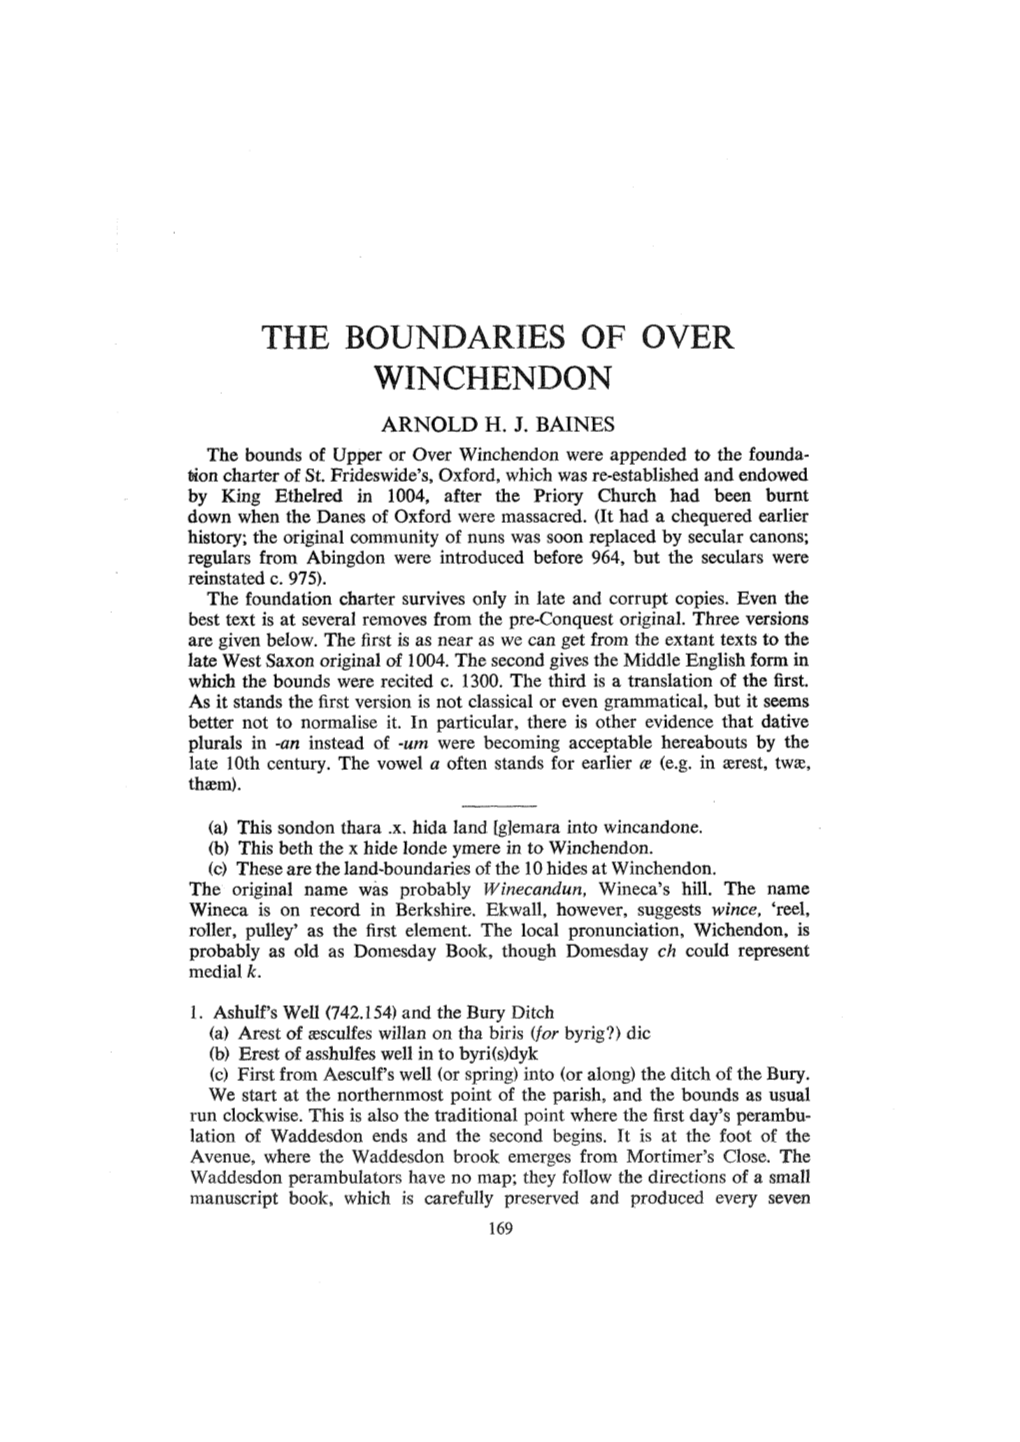 The Boundaries of Over Winchendon. Arnold H.J.Baines